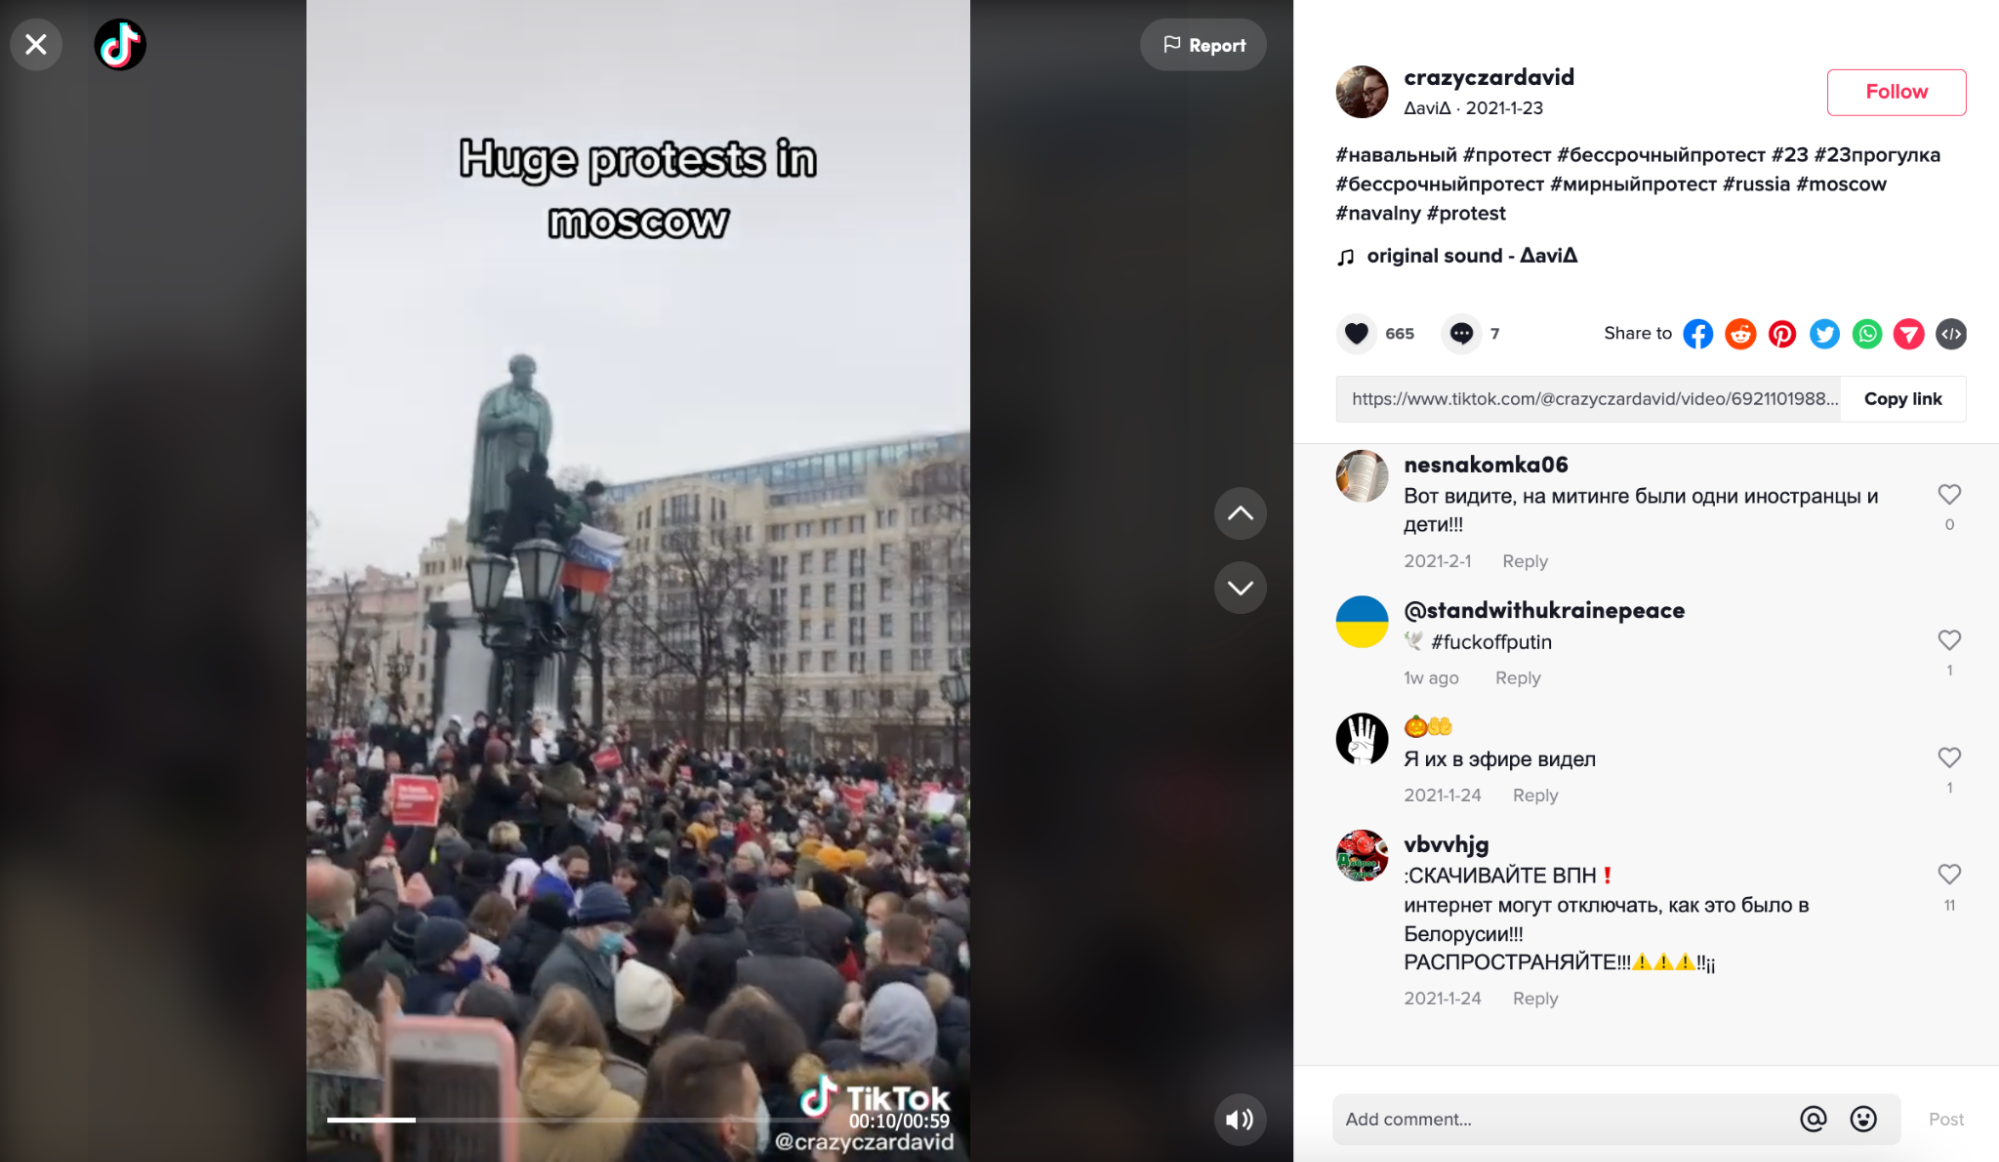 TikTok video of protests in Moscow